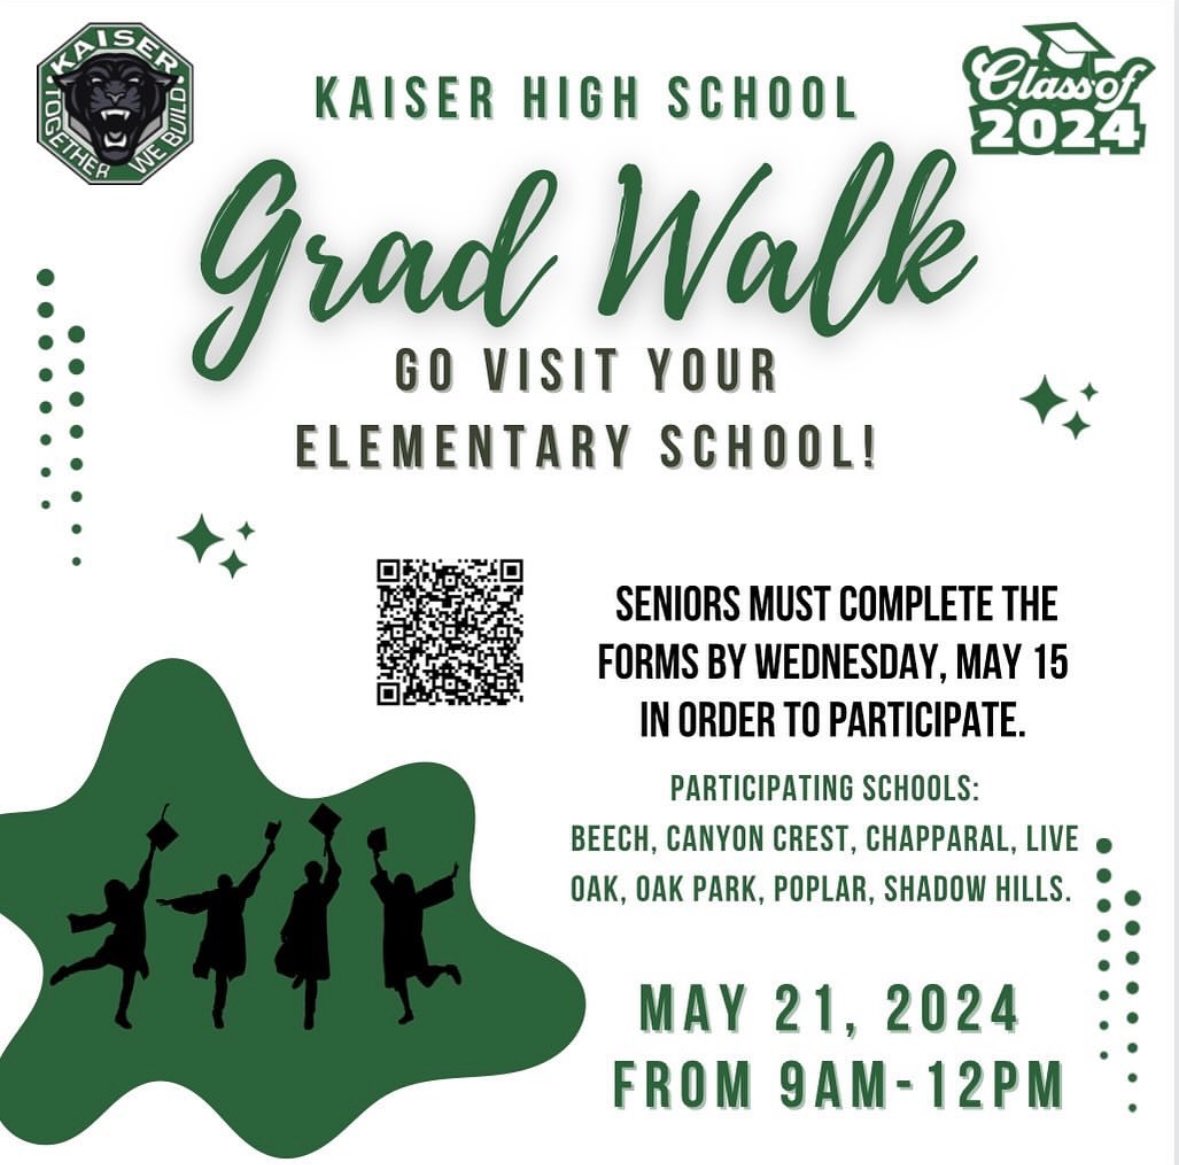 Looking forward to our first ever Grad Walk tomorrow with our partner schools! 🎓💚